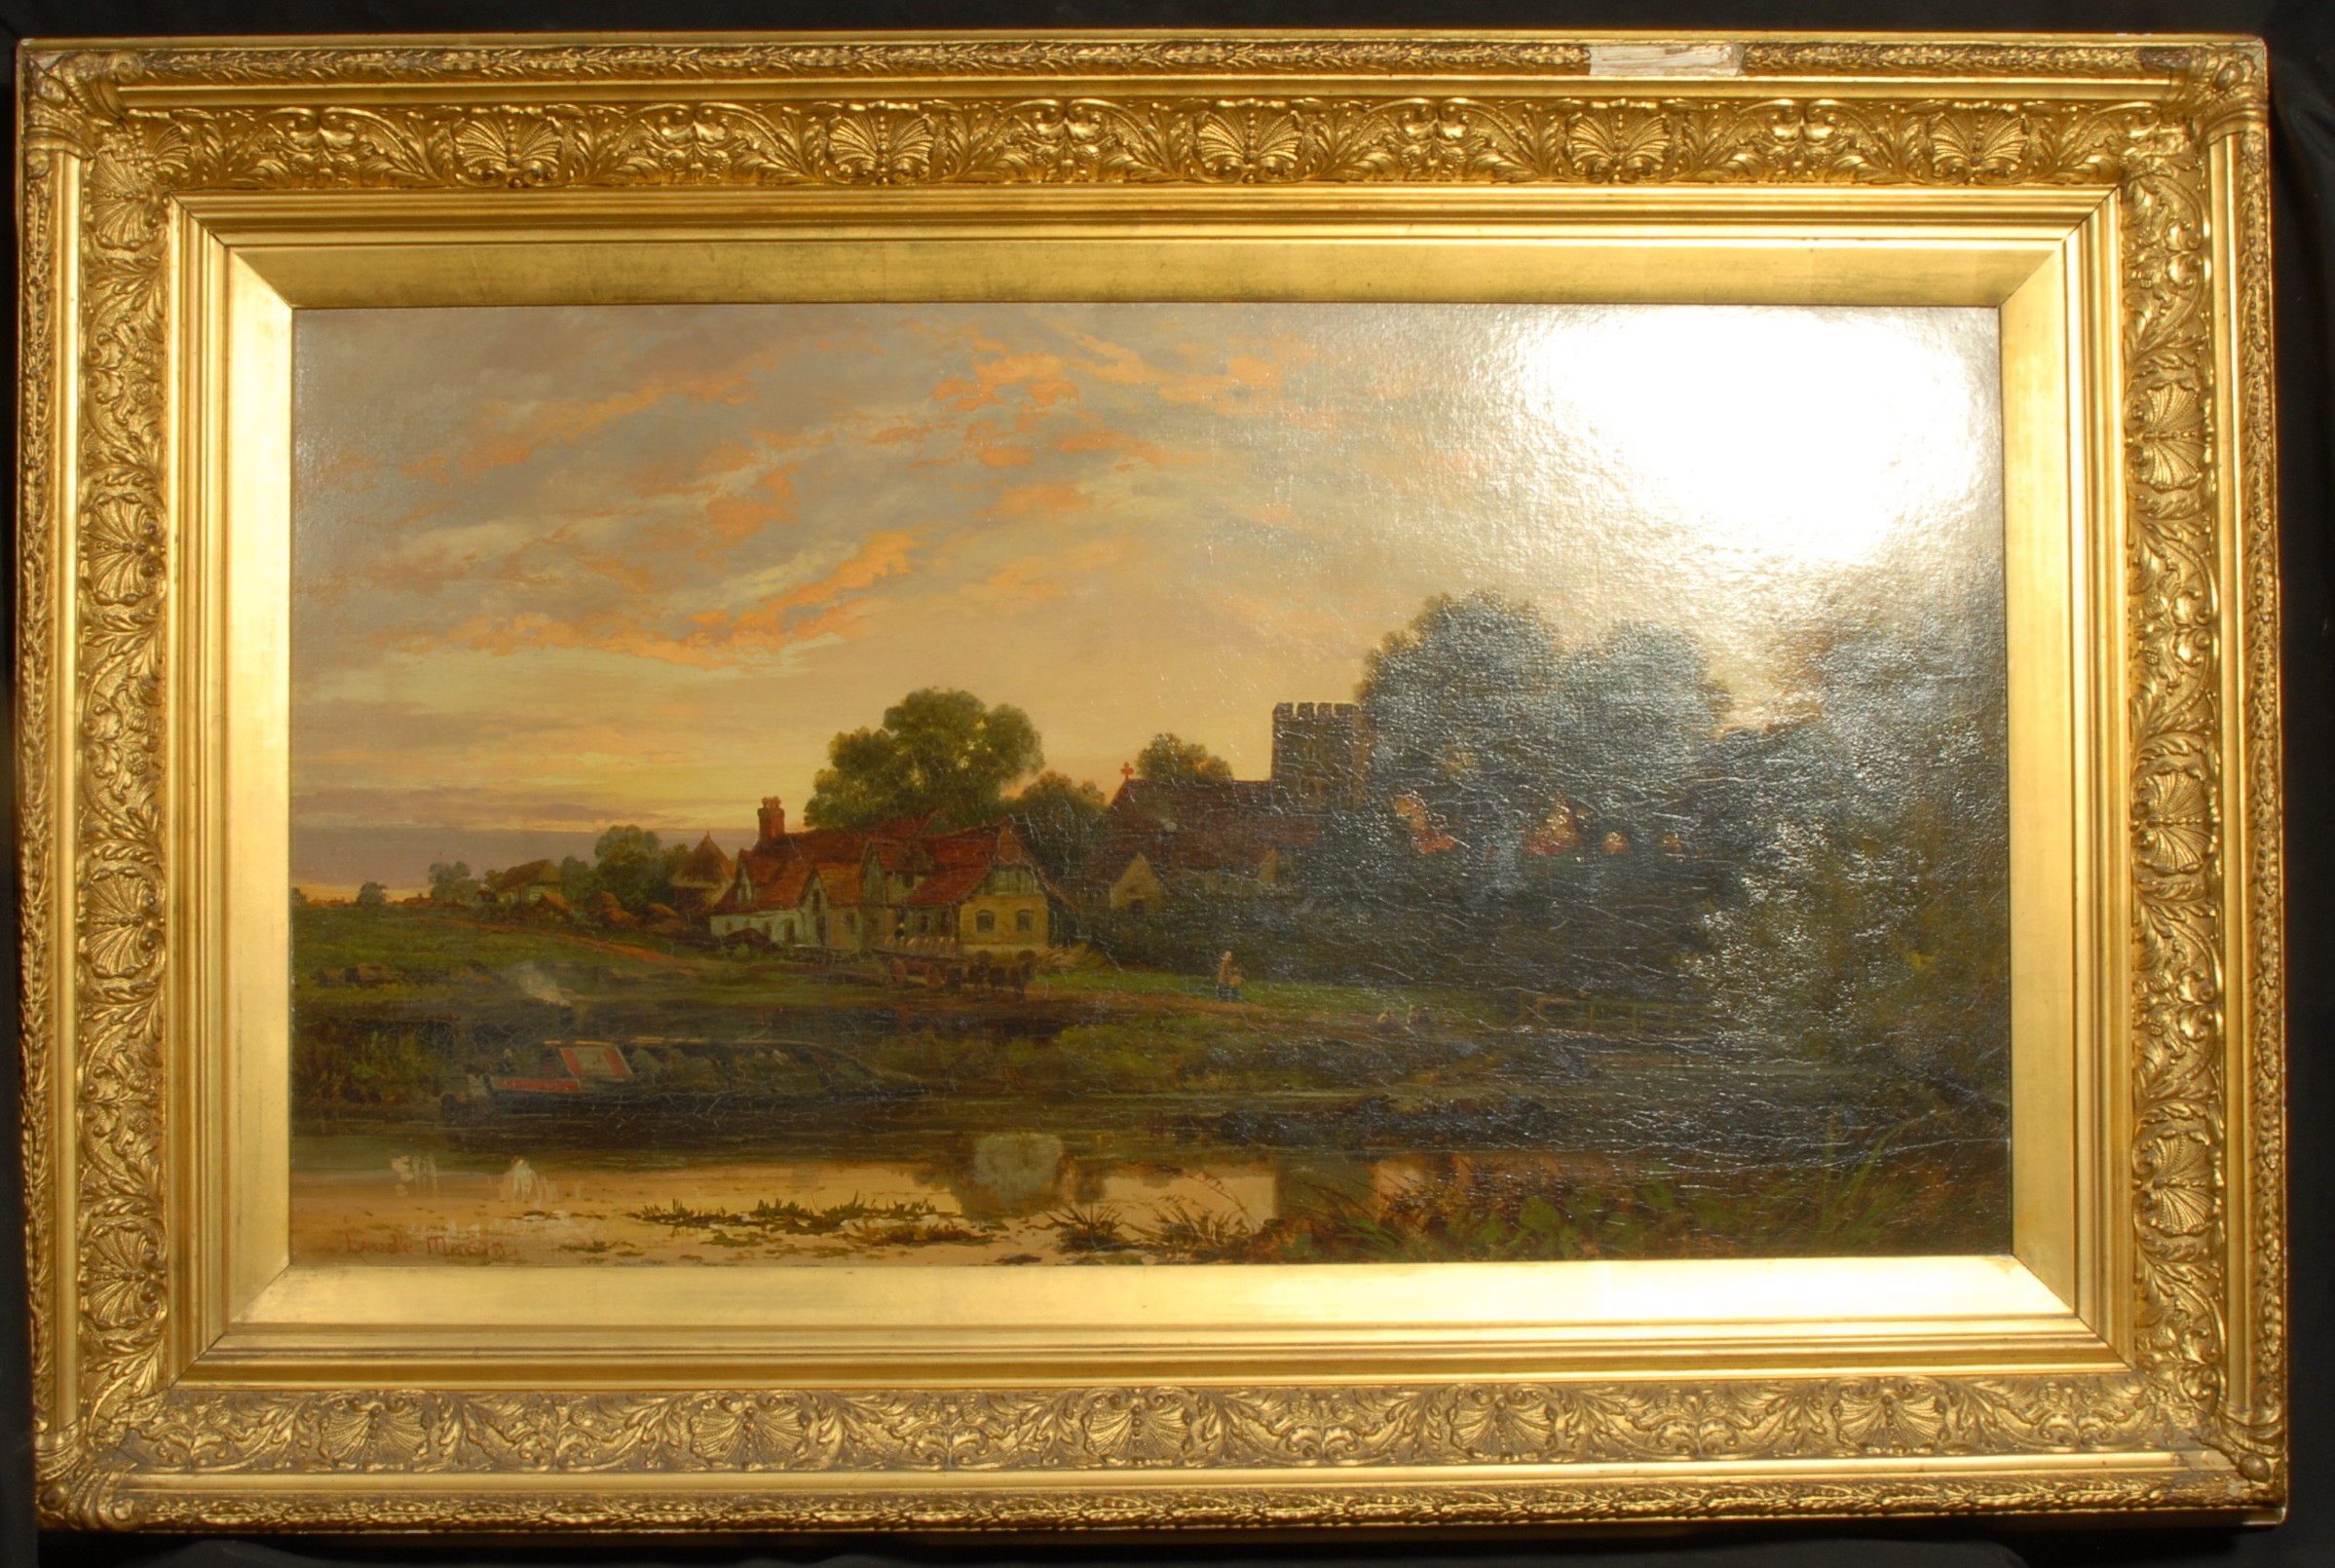 Claude Mason (19th century) Village at Sunset signed, oil on canvas, 44.5cm x 80cm - Image 2 of 4